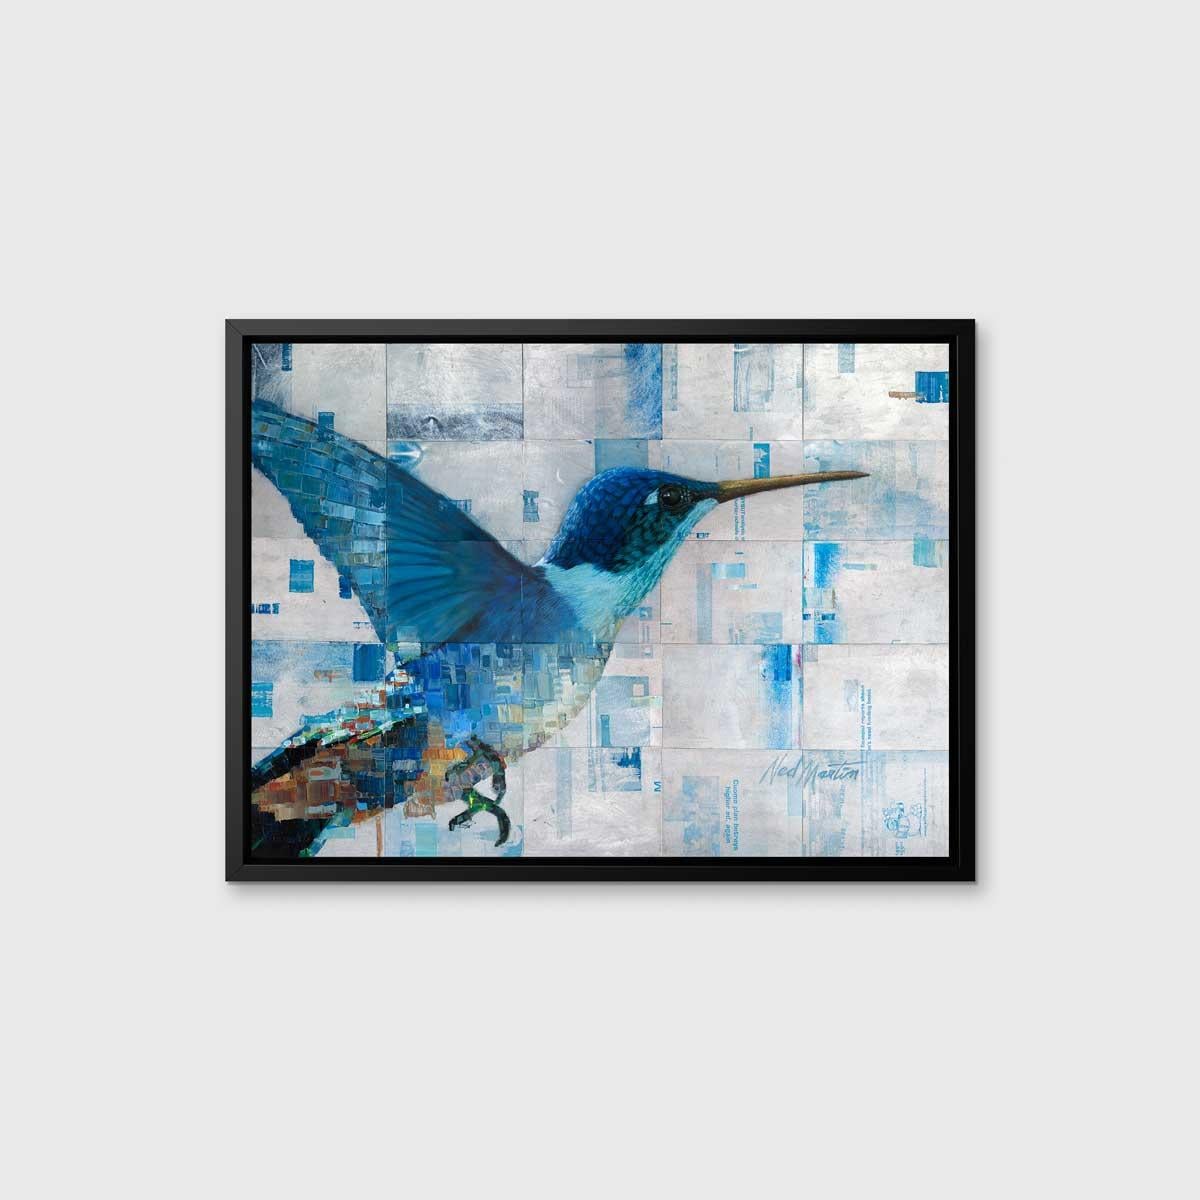 This large, abstract limited edition print by Ned Martin features a hummingbird as the central focus. The hummingbird is varying shades of blue and warm orange tones, while an abstracted background layers silver and blue squares next to, and overtop